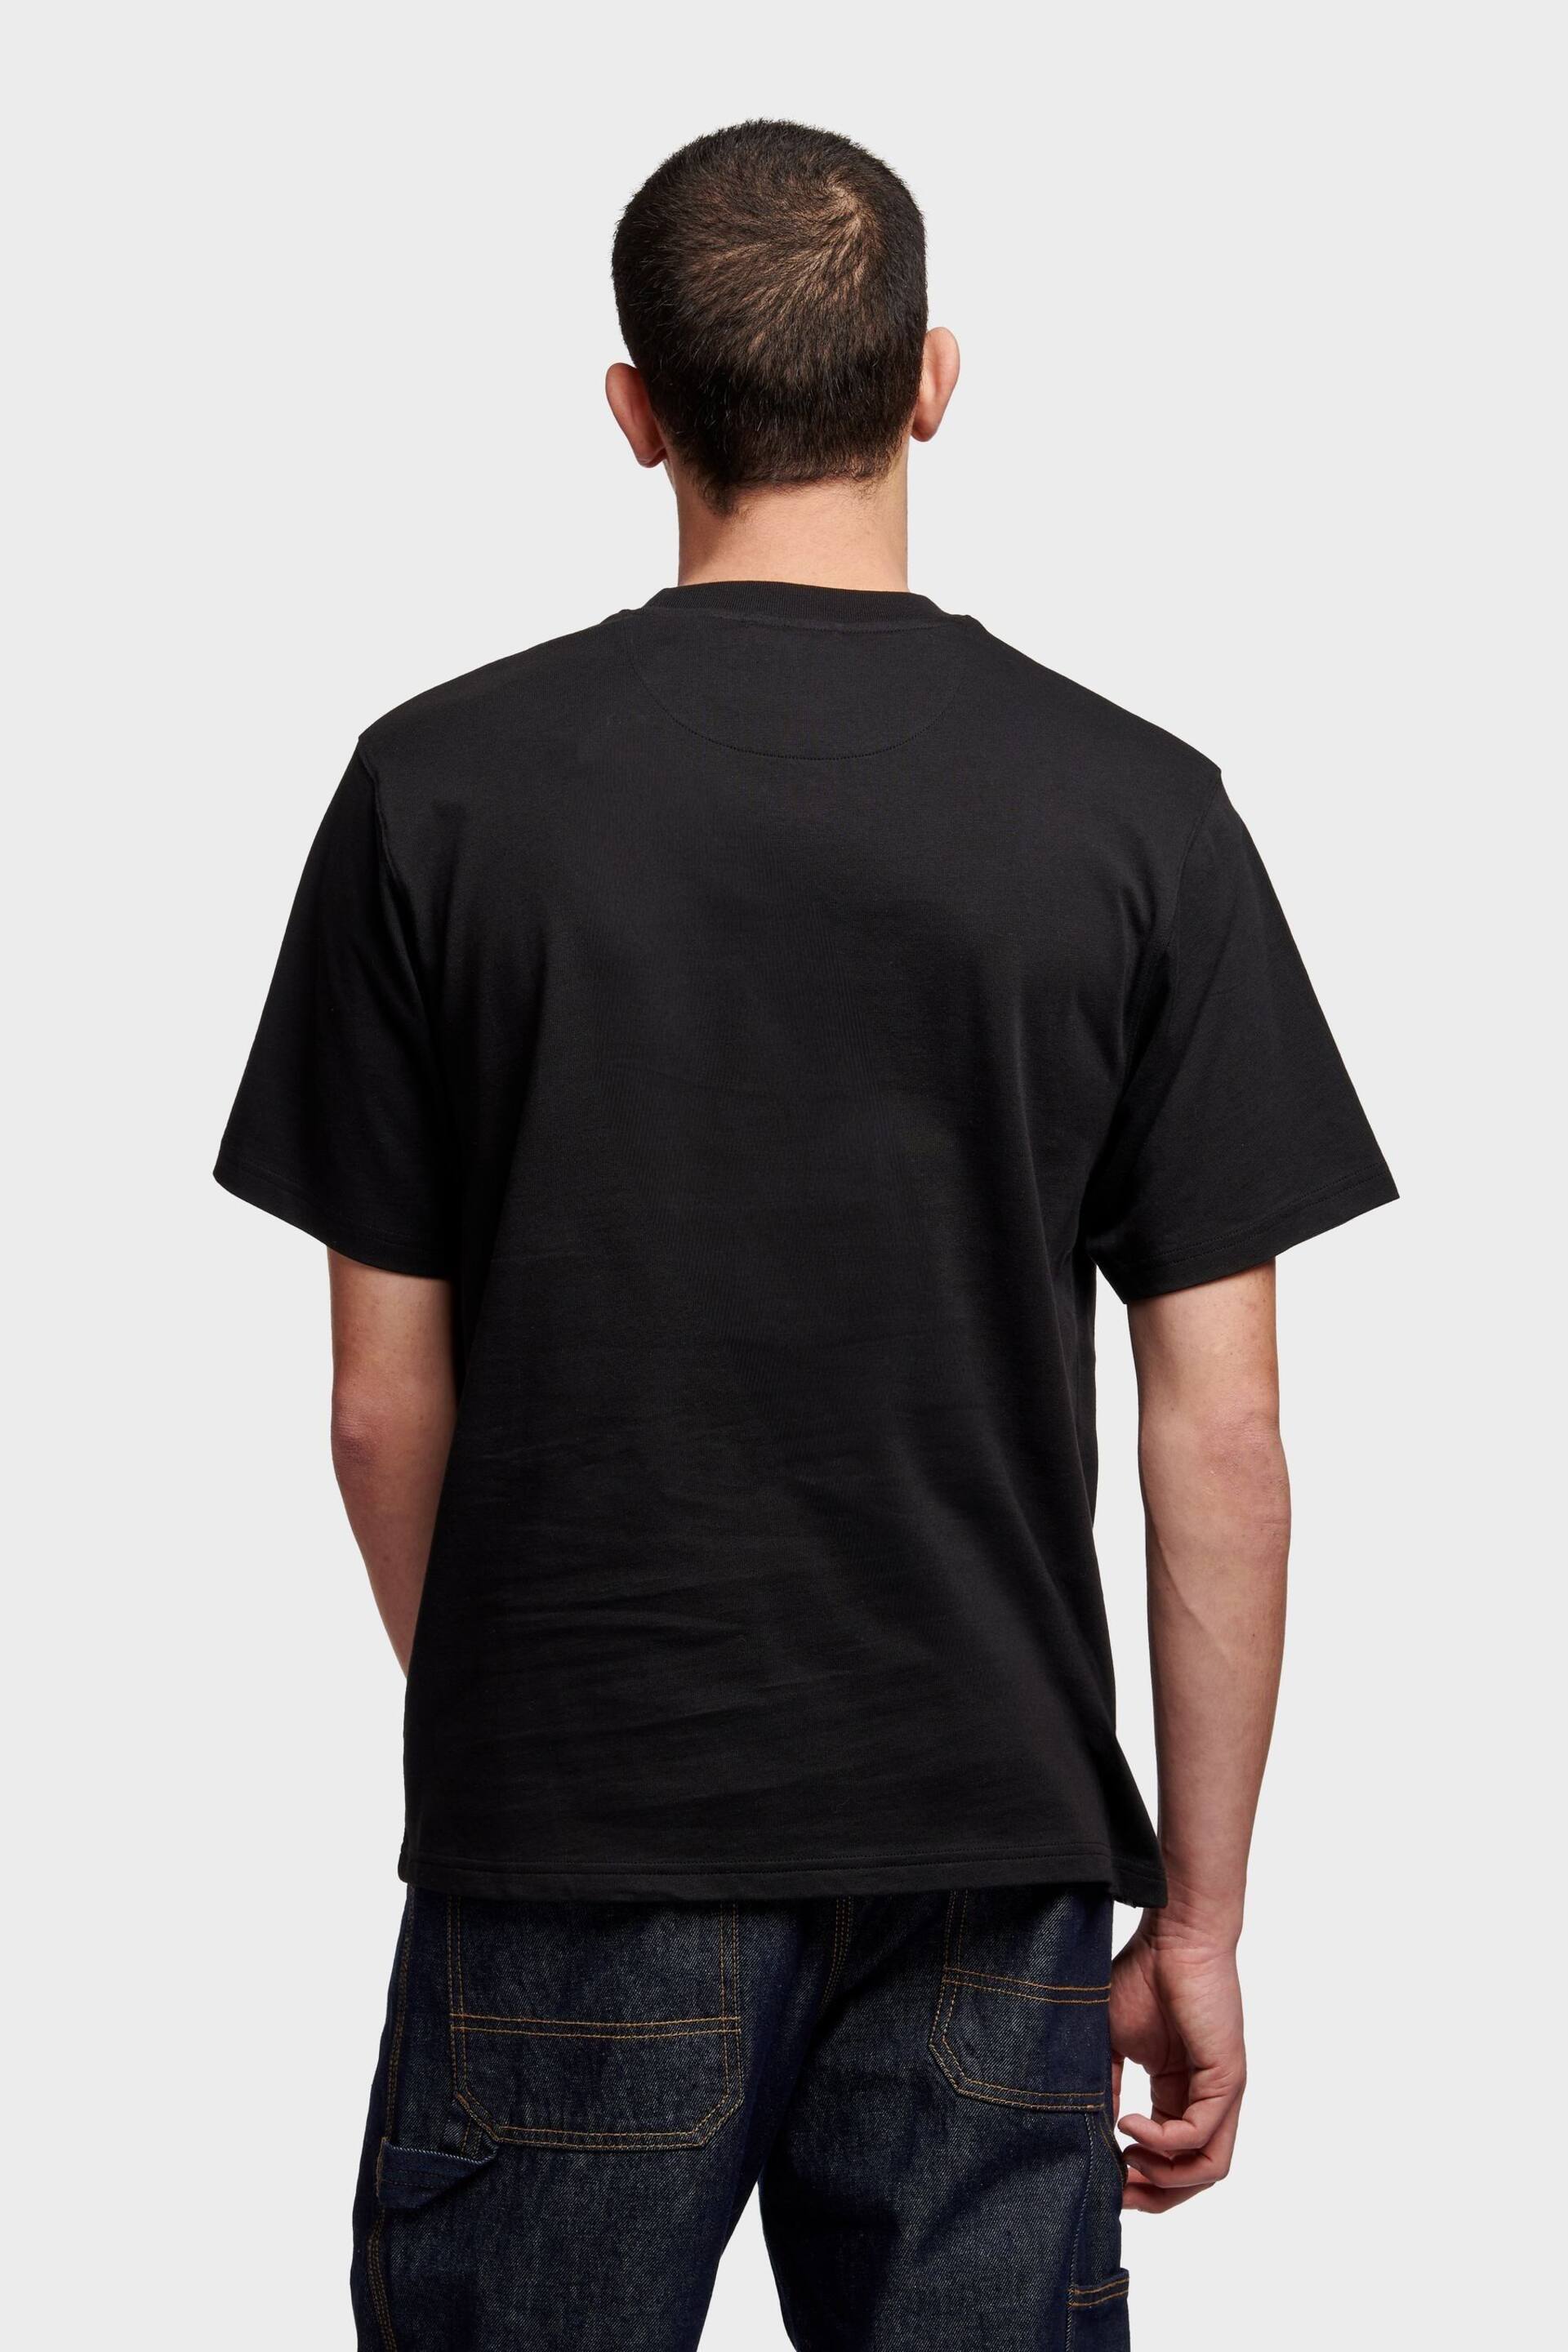 Penfield Mens Relaxed Fit Original Logo T-Shirt - Image 8 of 8